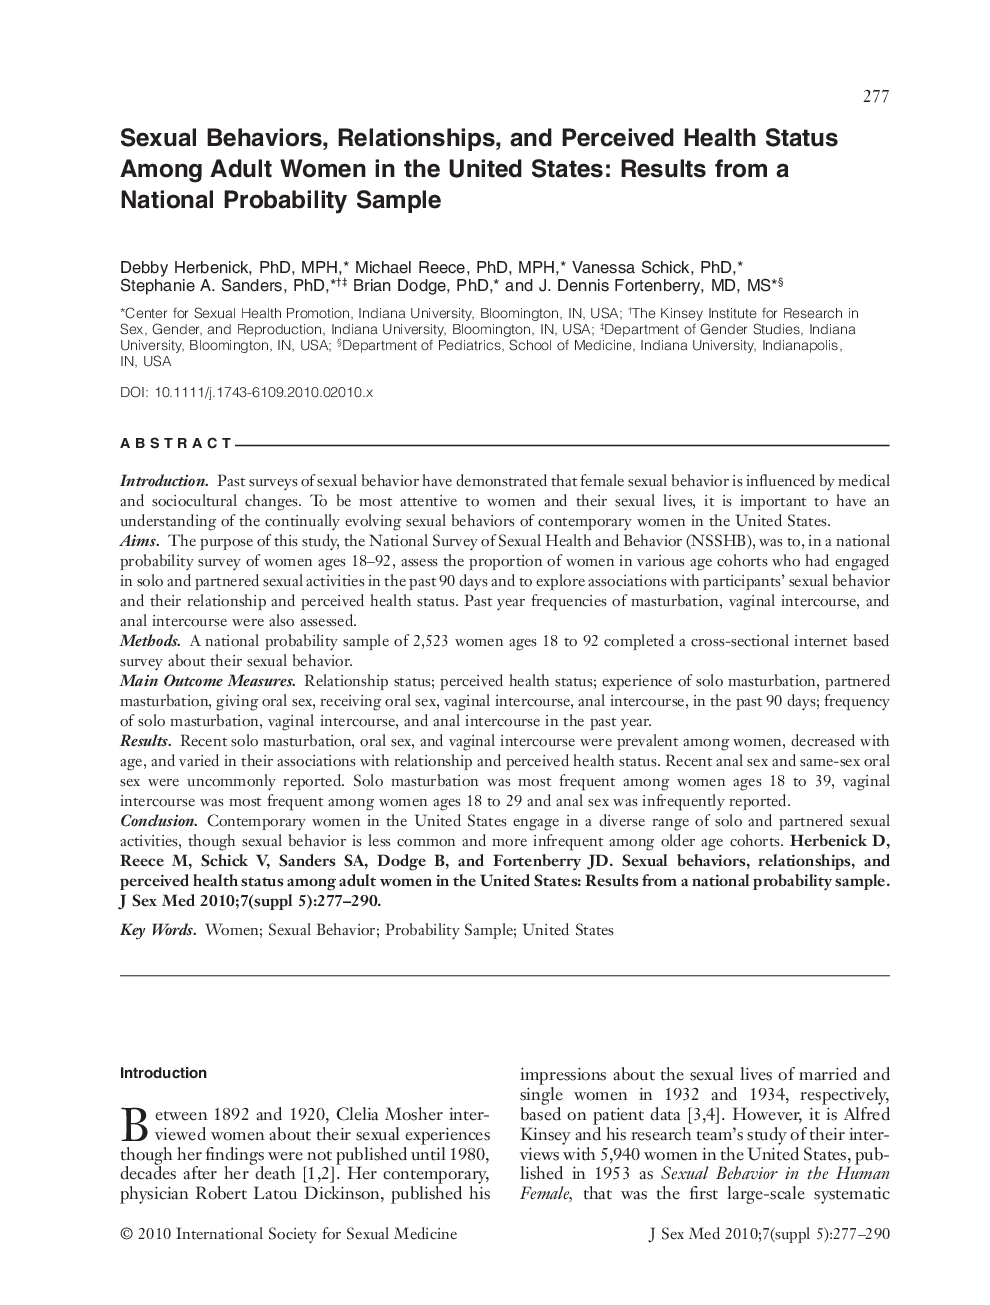 Sexual Behaviors, Relationships, and Perceived Health Status Among Adult Women in the United States: Results from a National Probability Sample